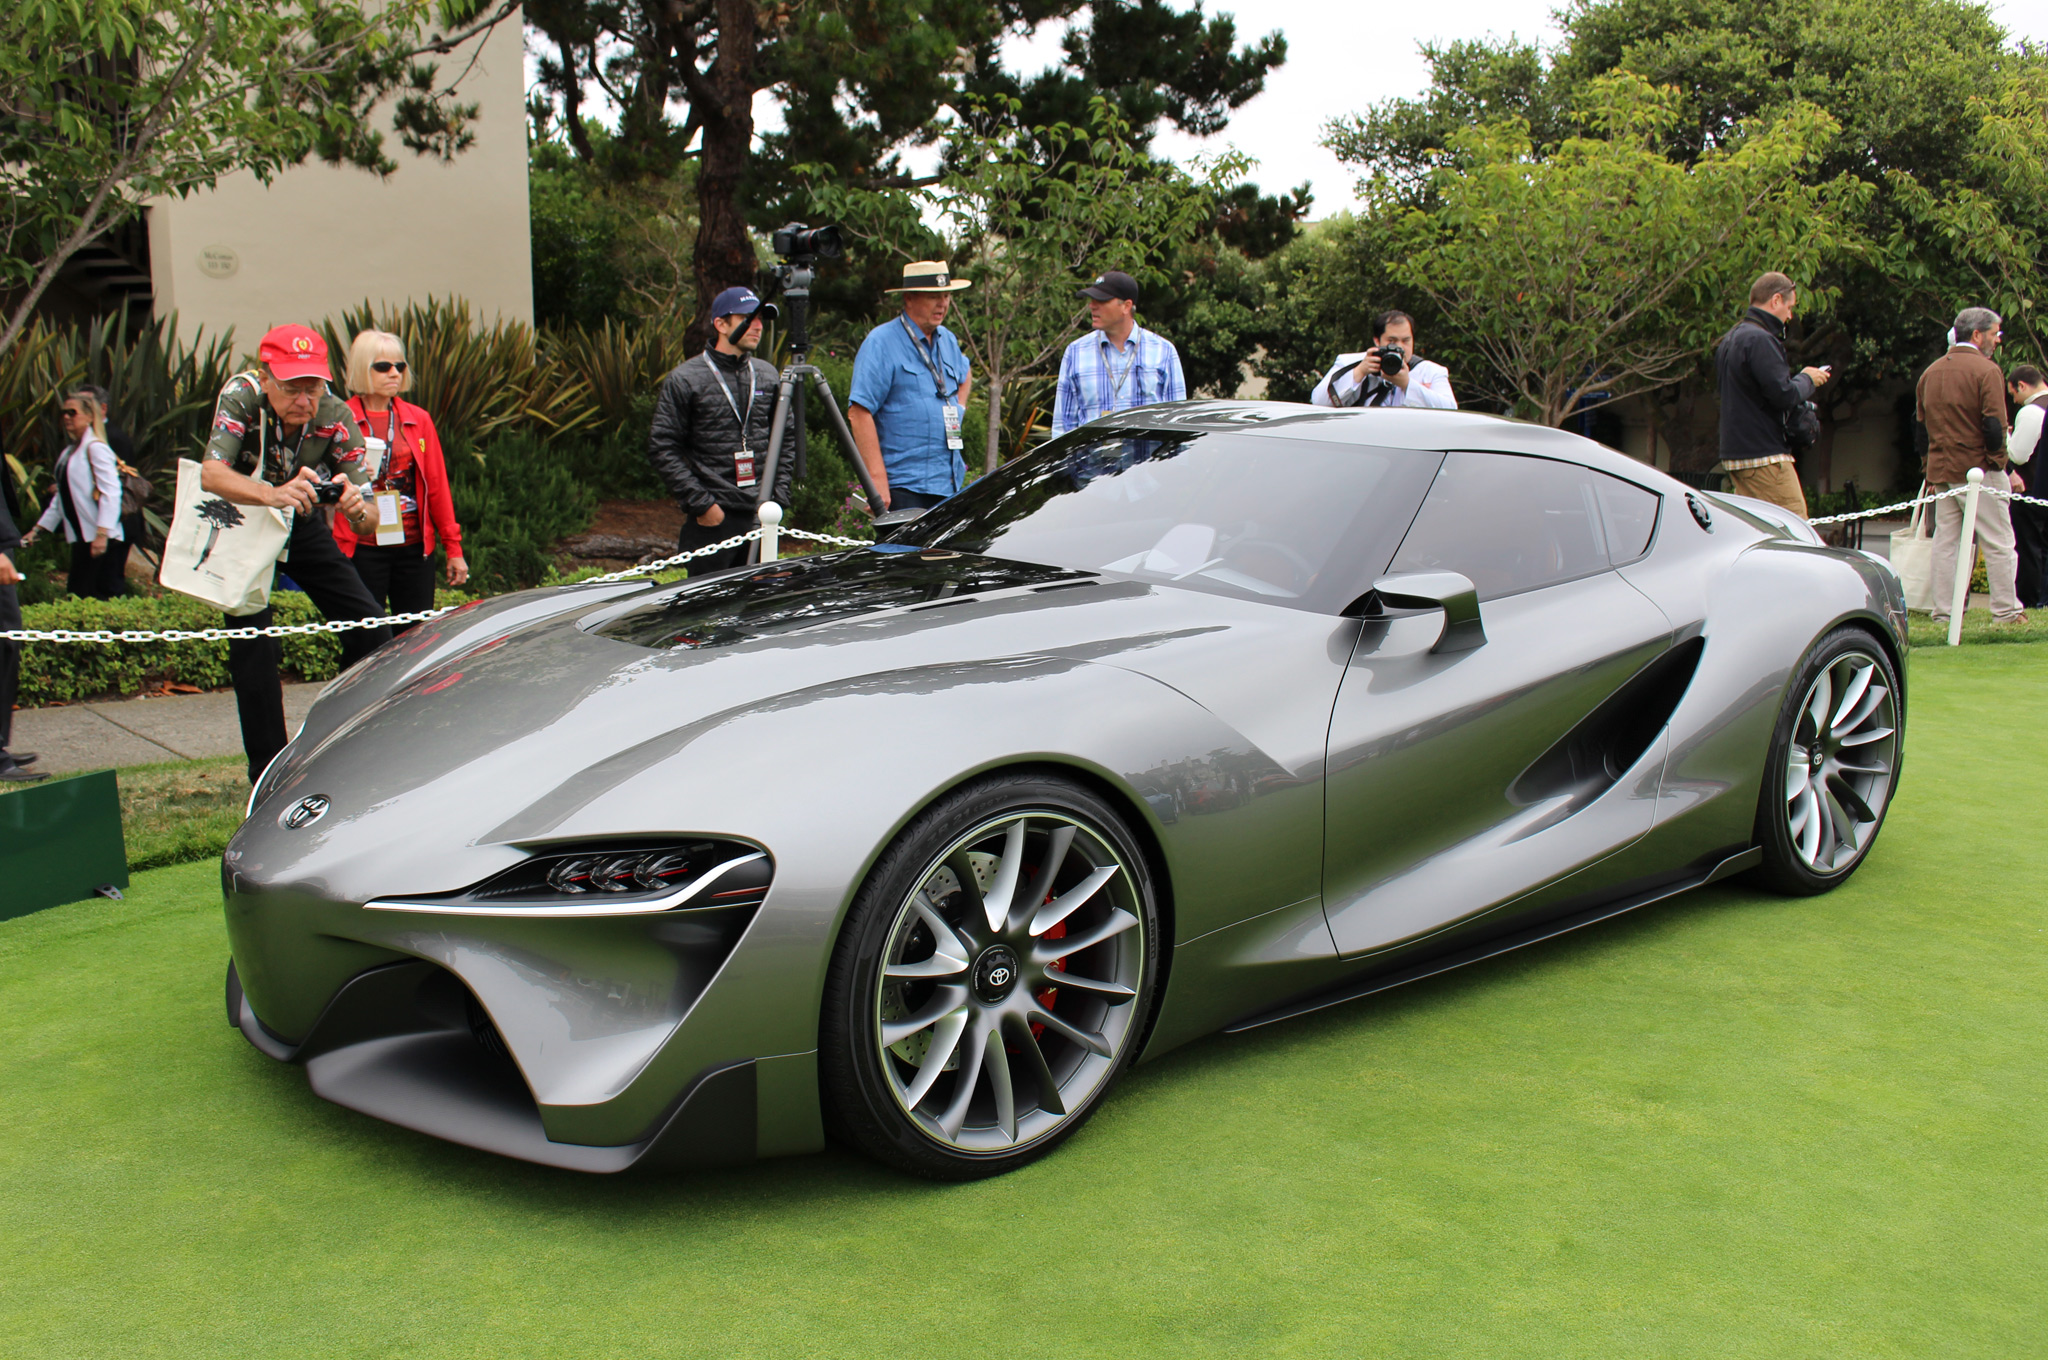 toyota-ft-1-concept-in-graphite-front-side-view.jpg